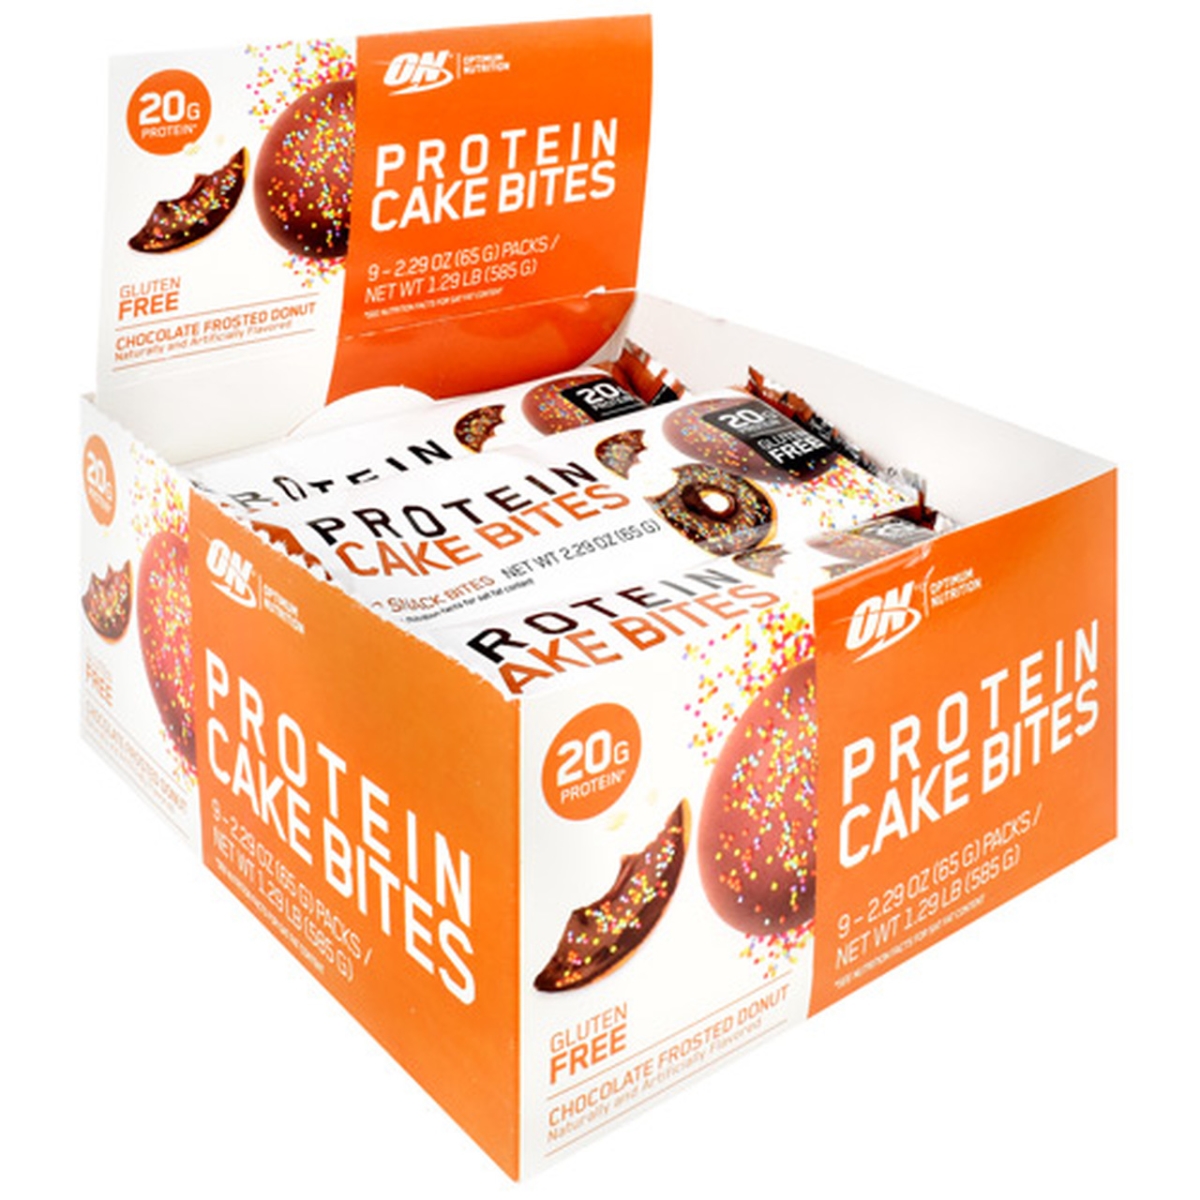 UPC 748927959277 product image for 2730671 Protein Cake Bites, Chocolate Frosted Donut - Pack of 9 | upcitemdb.com